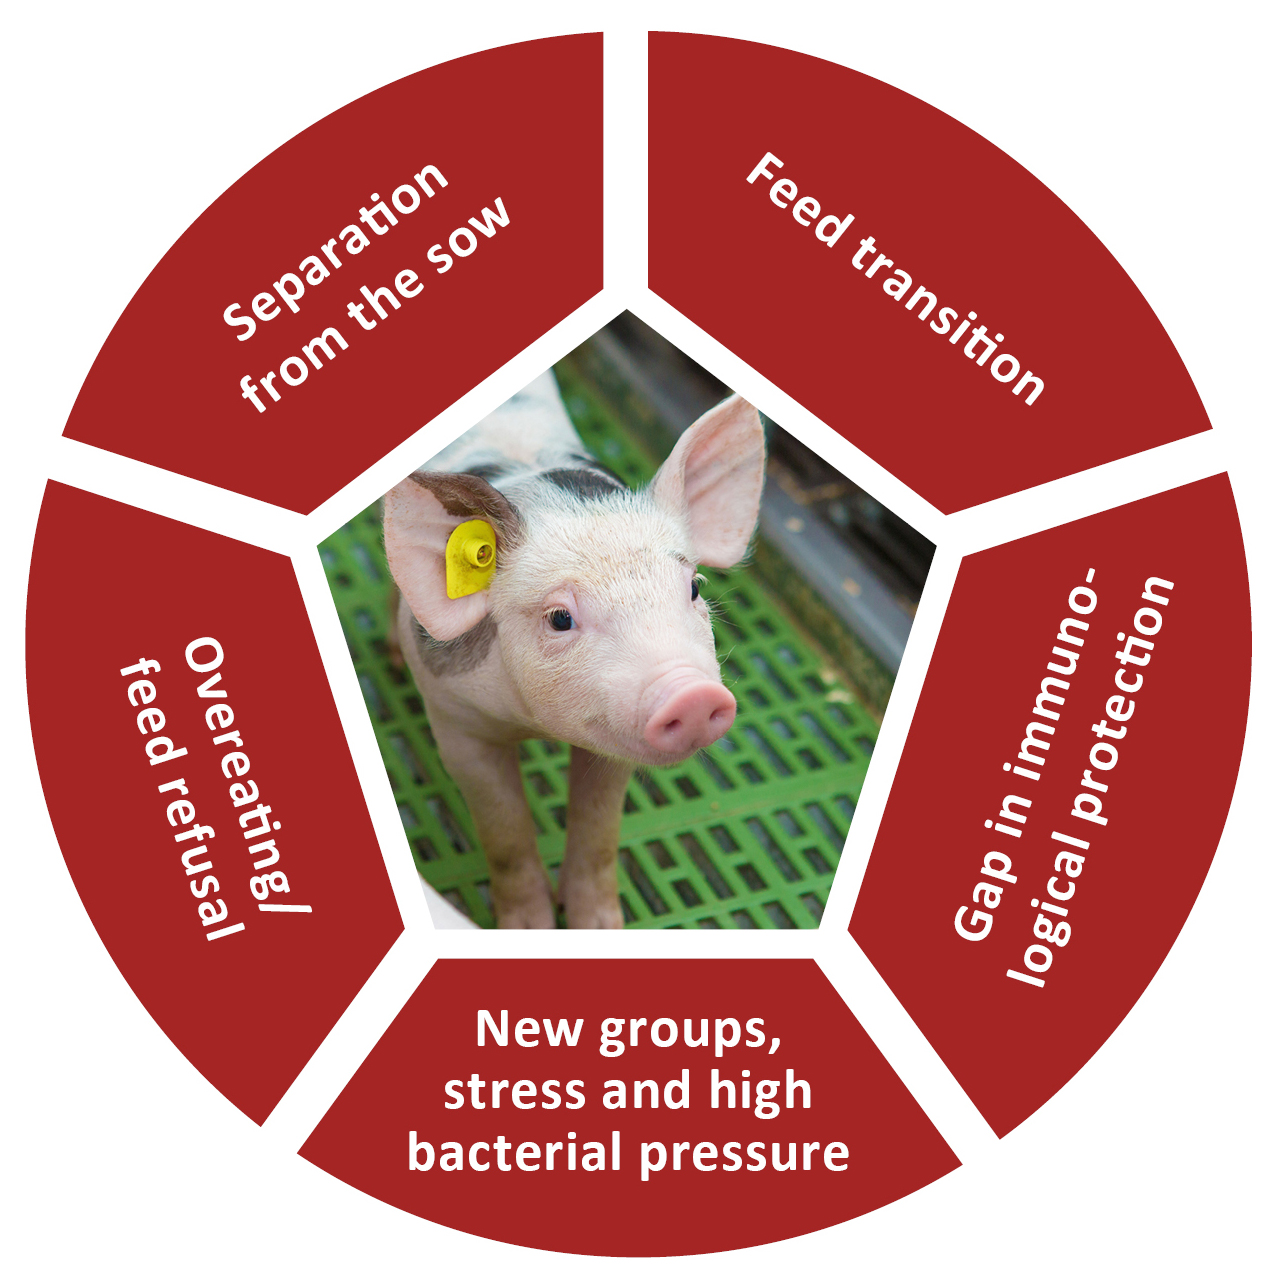 Intestinal health in weaning piglets